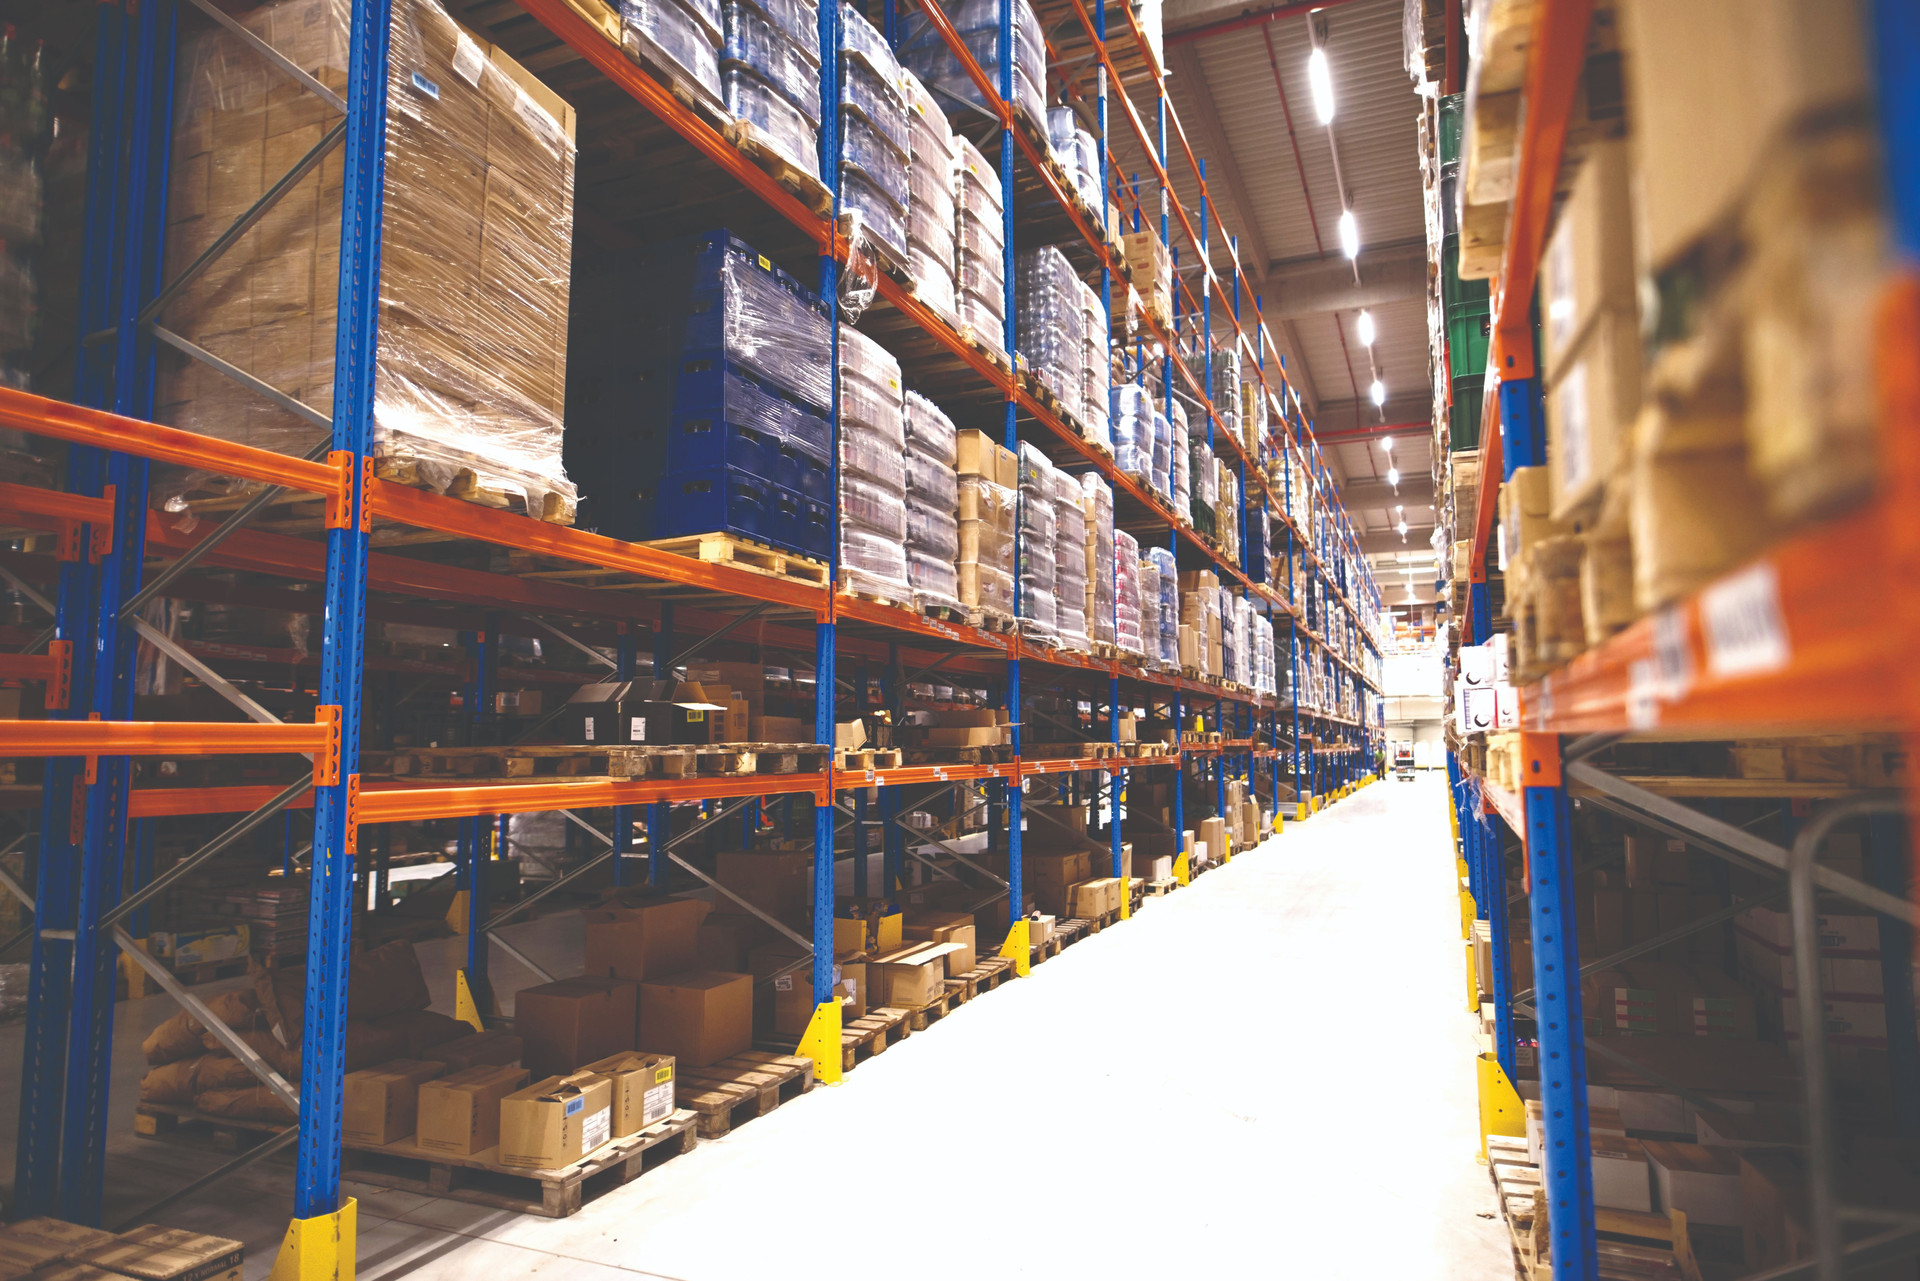 interior-large-distribution-warehouse-with-shelves-stacked-with-palettes-goods-ready-market-compressed.jpg